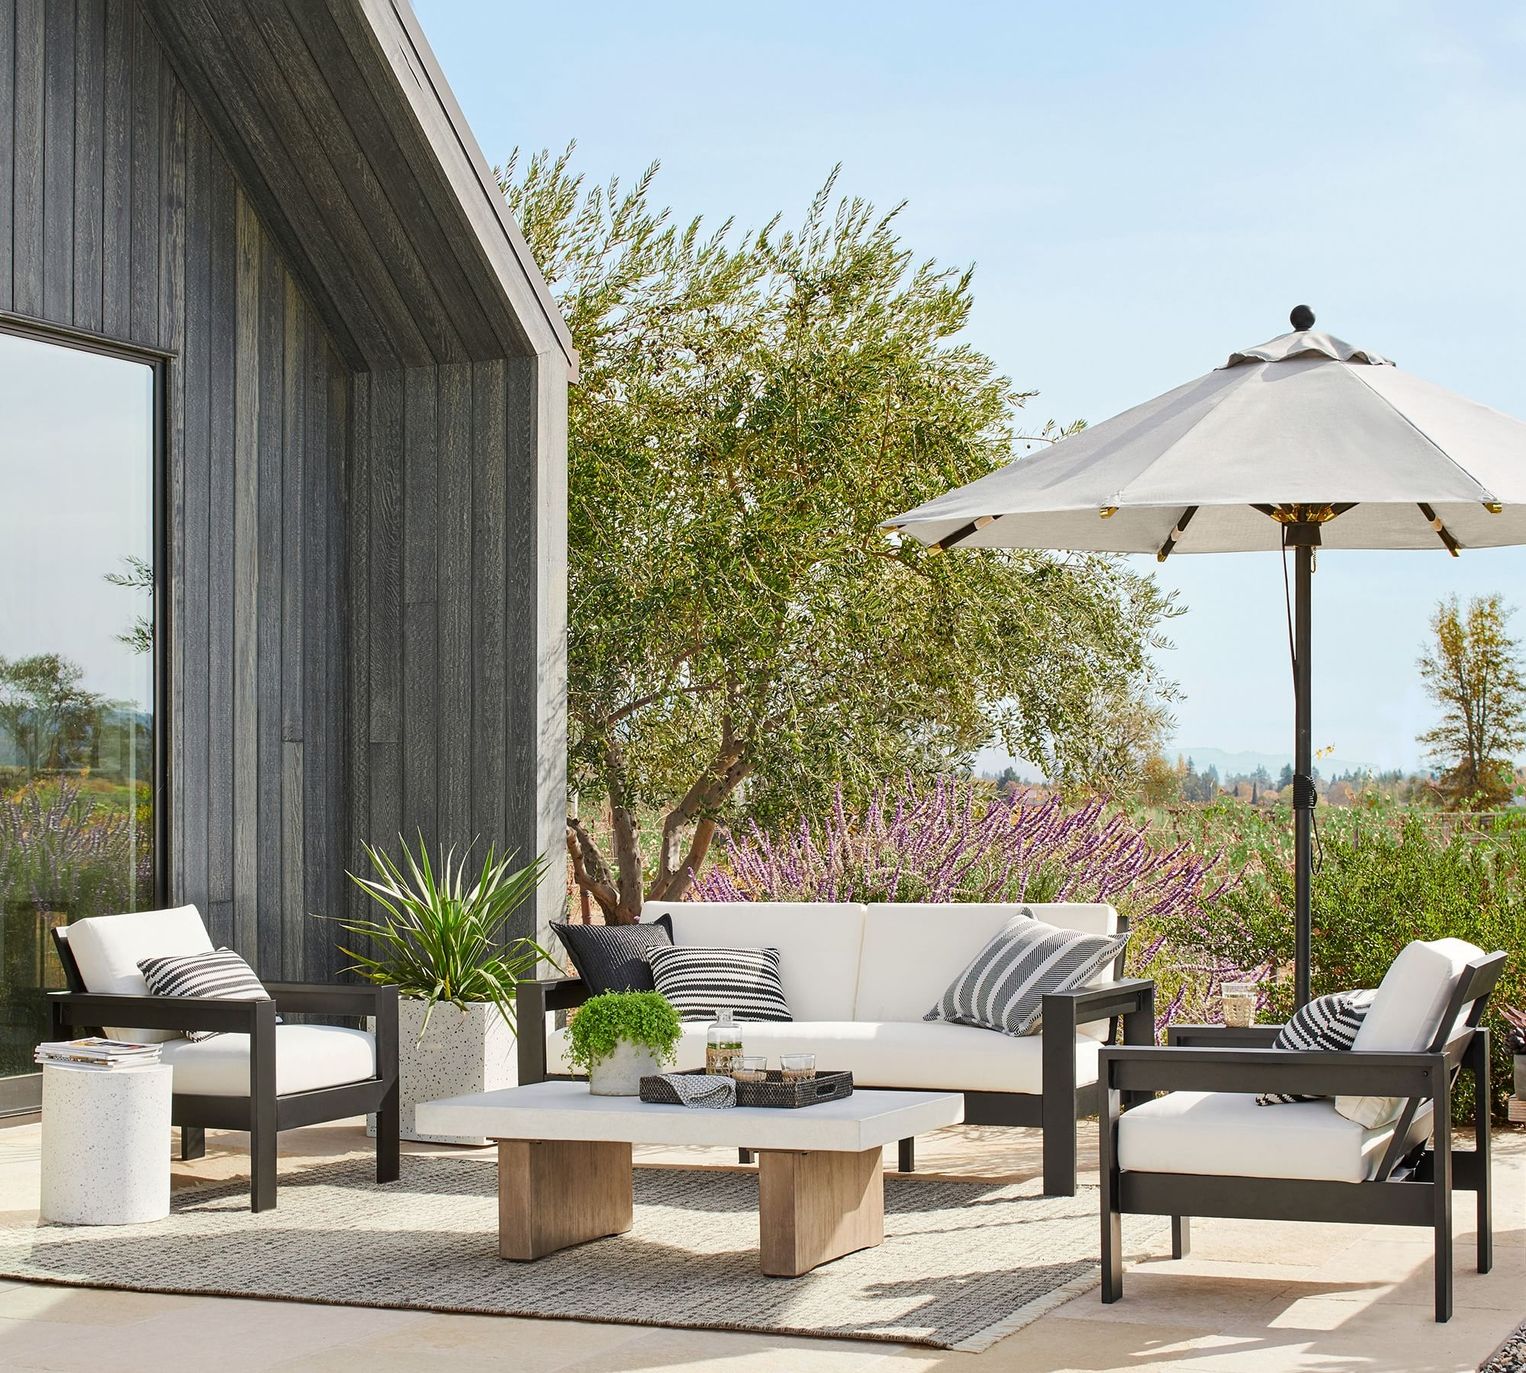 The 13 Places to Buy Patio Furniture and Outdoor Furniture in 2023